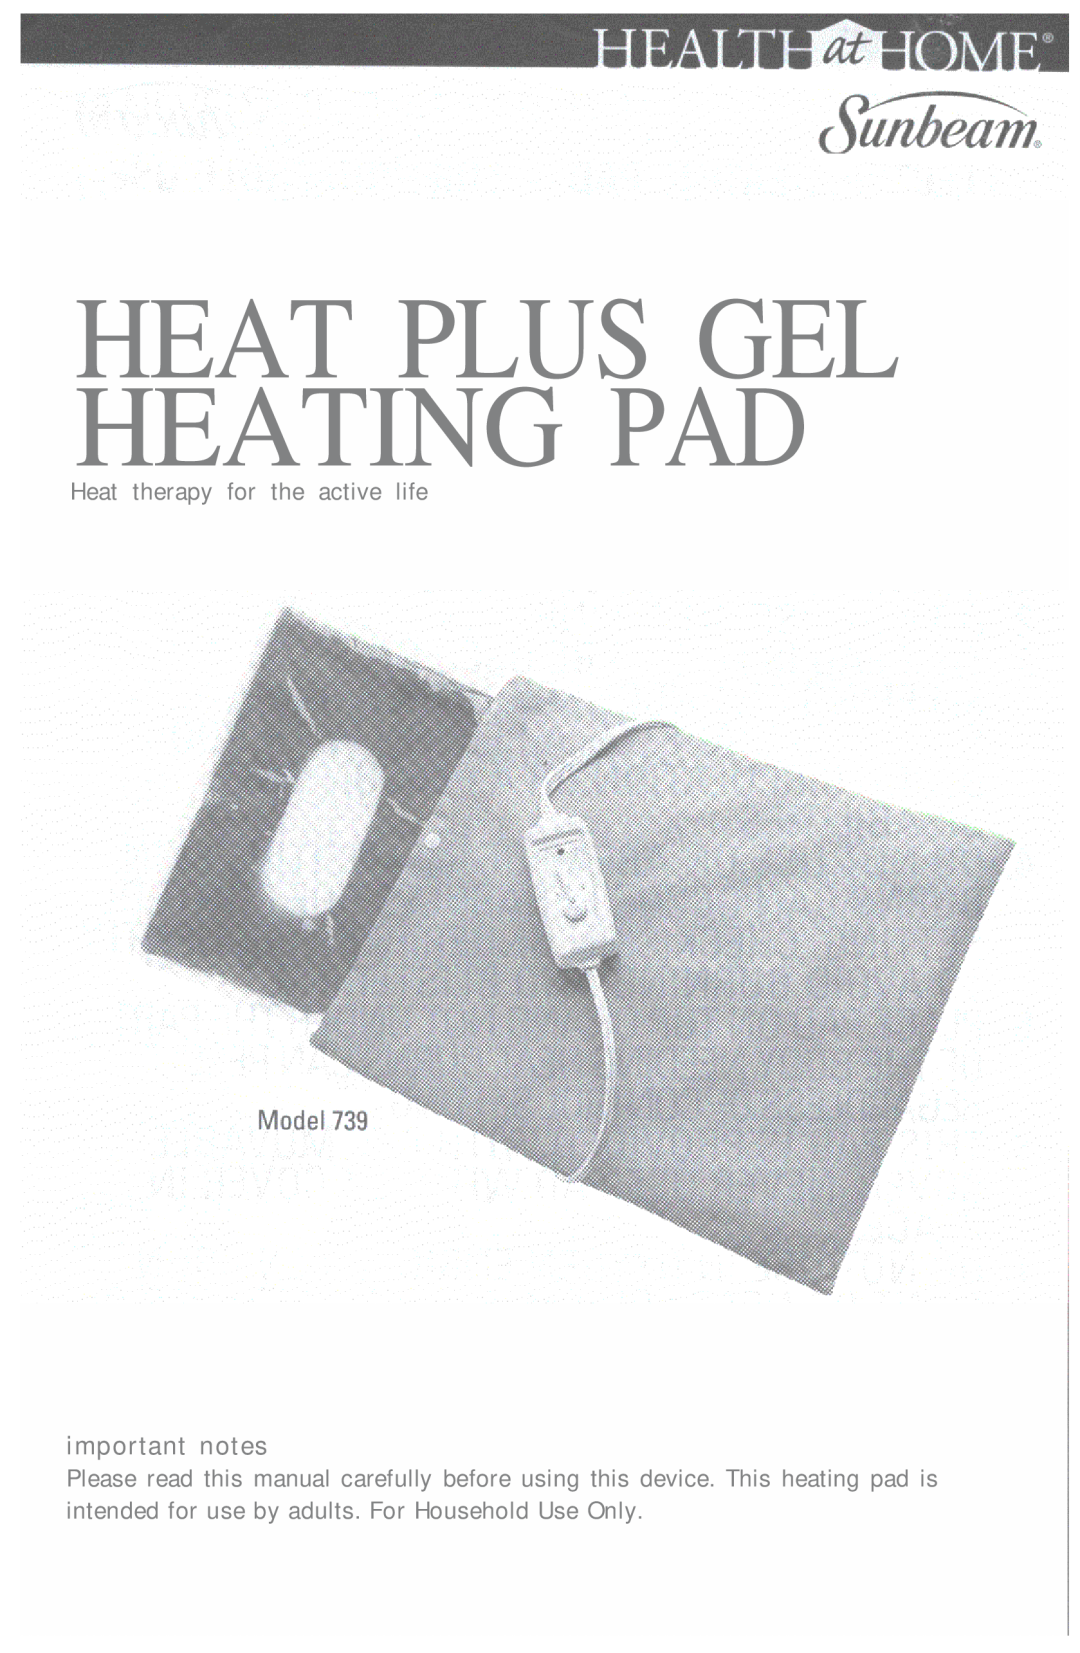 Sunbeam 739 manual Heat Plus Gel Heating Pad, important notes, Heat therapy for the active life 